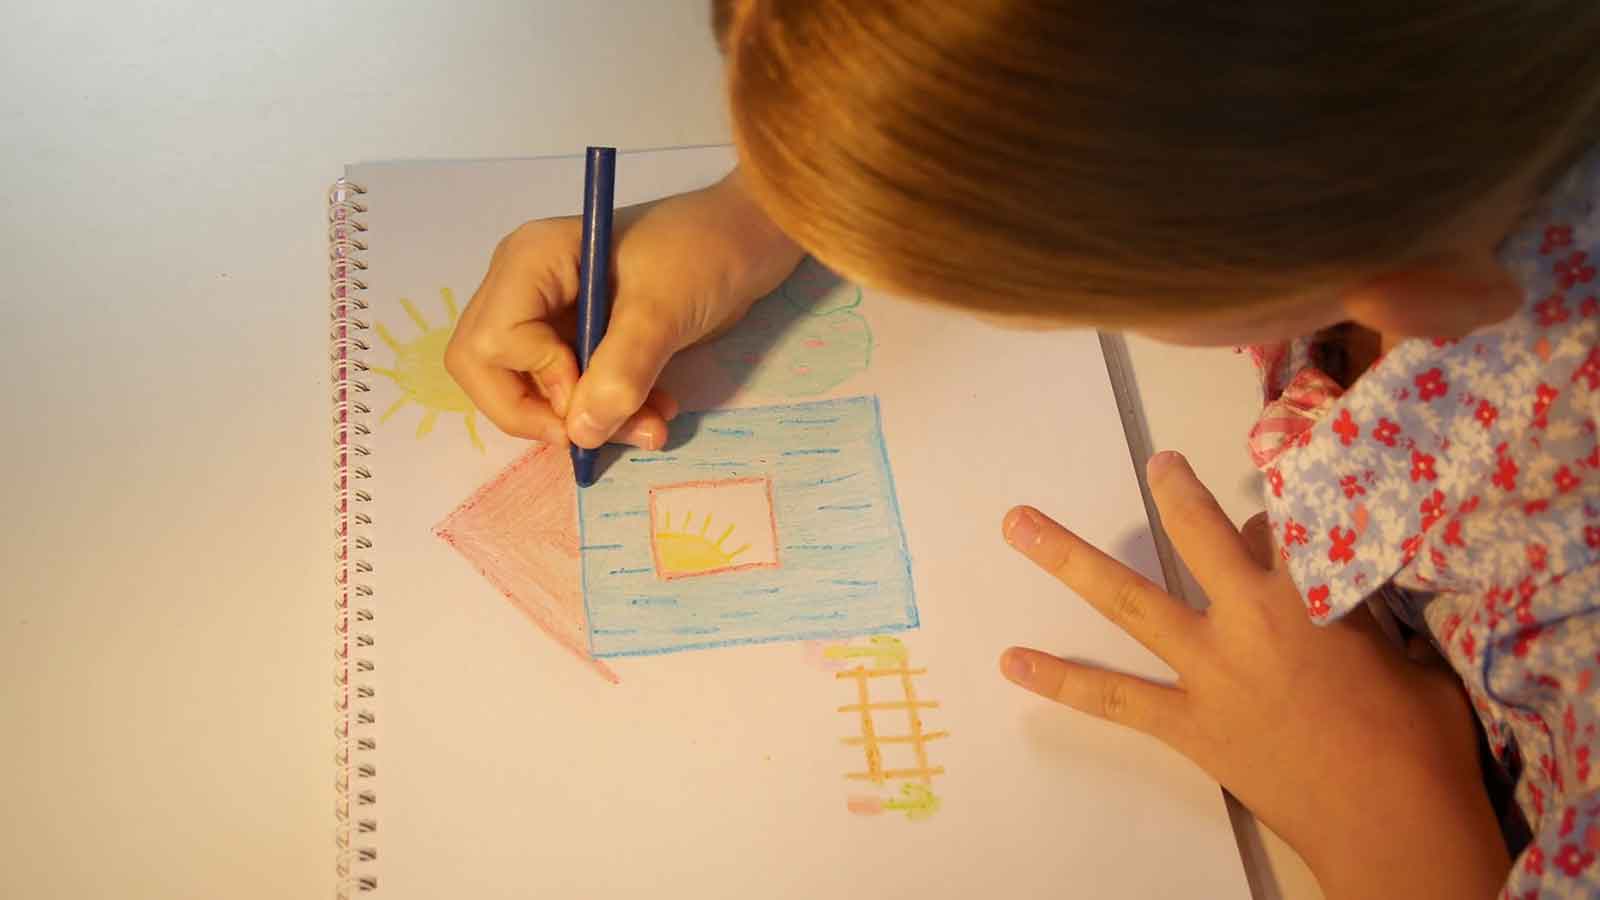 A young girl drawing a colourful house in a note book